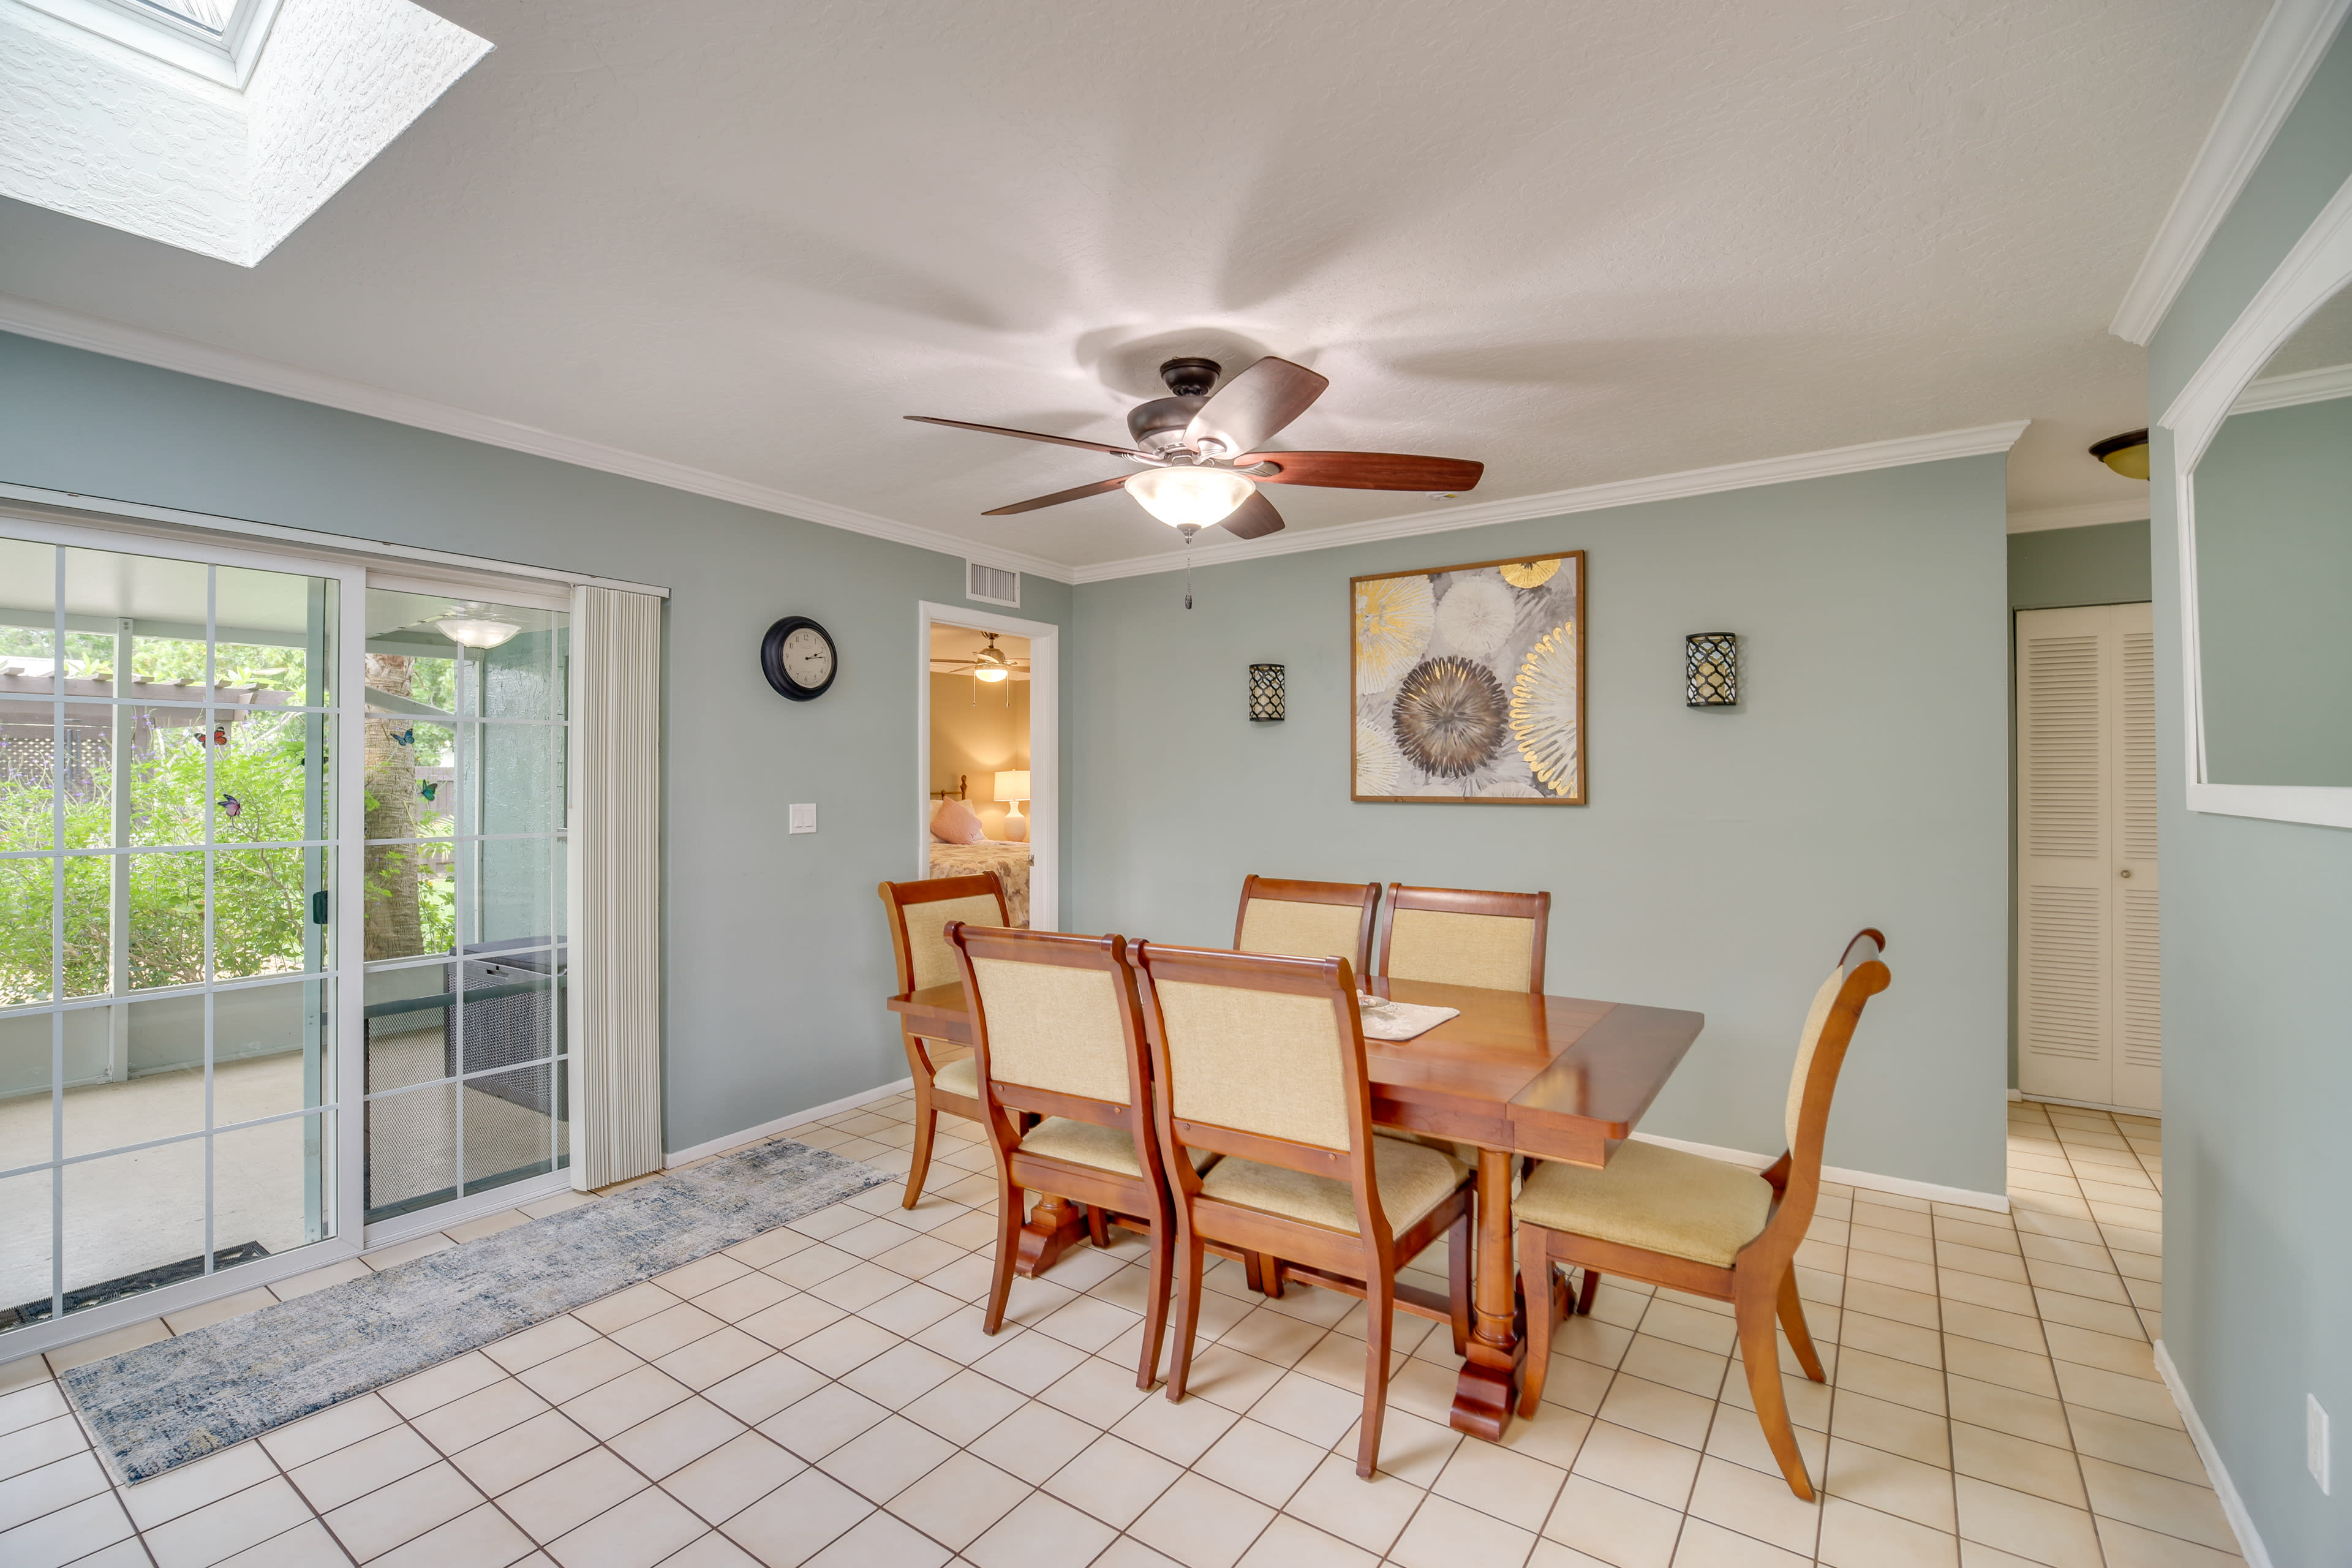 Dining Area | Dishware & Flatware Provided | Screened Porch Access